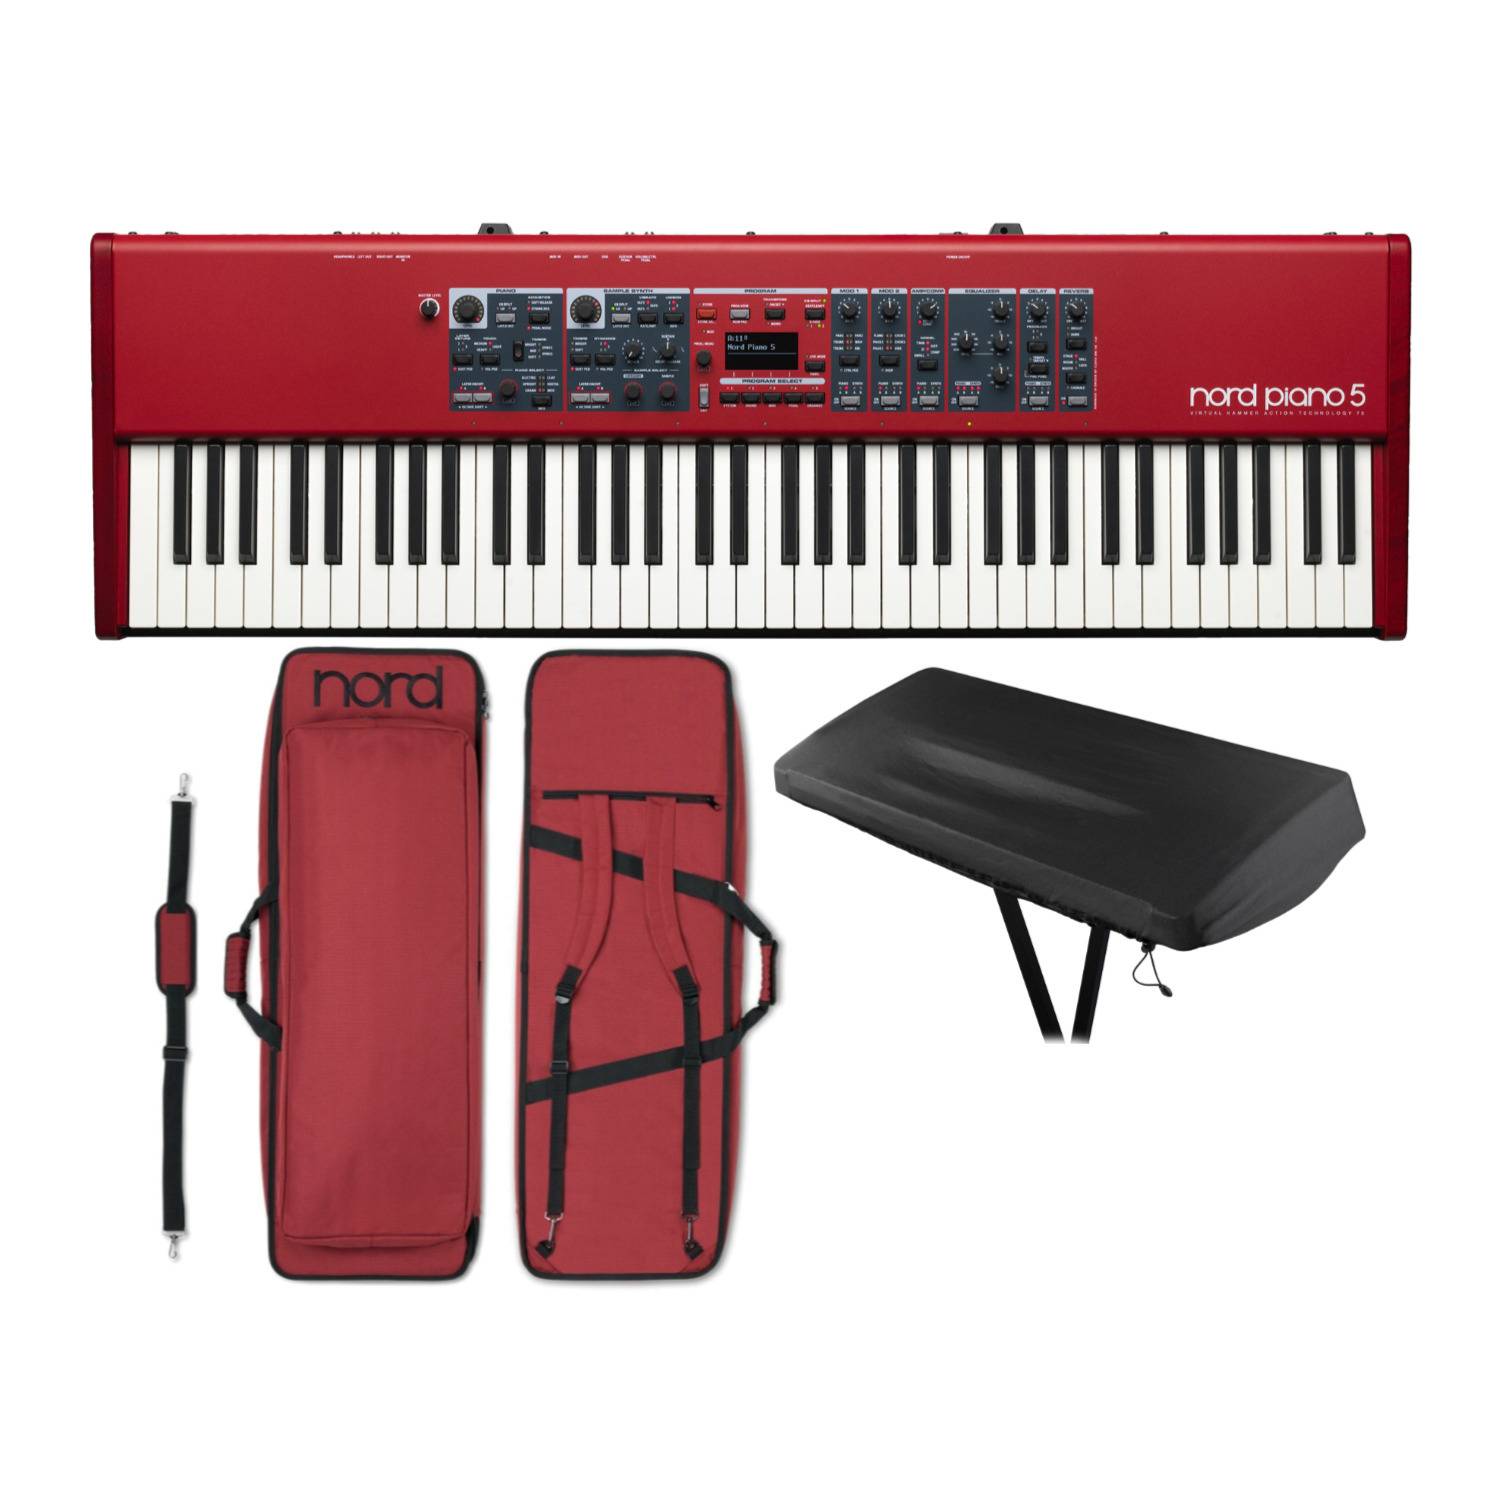 Nord Piano 5 73-Key Digital Piano with Soft Case and Keyboard Dust Cover Bundle